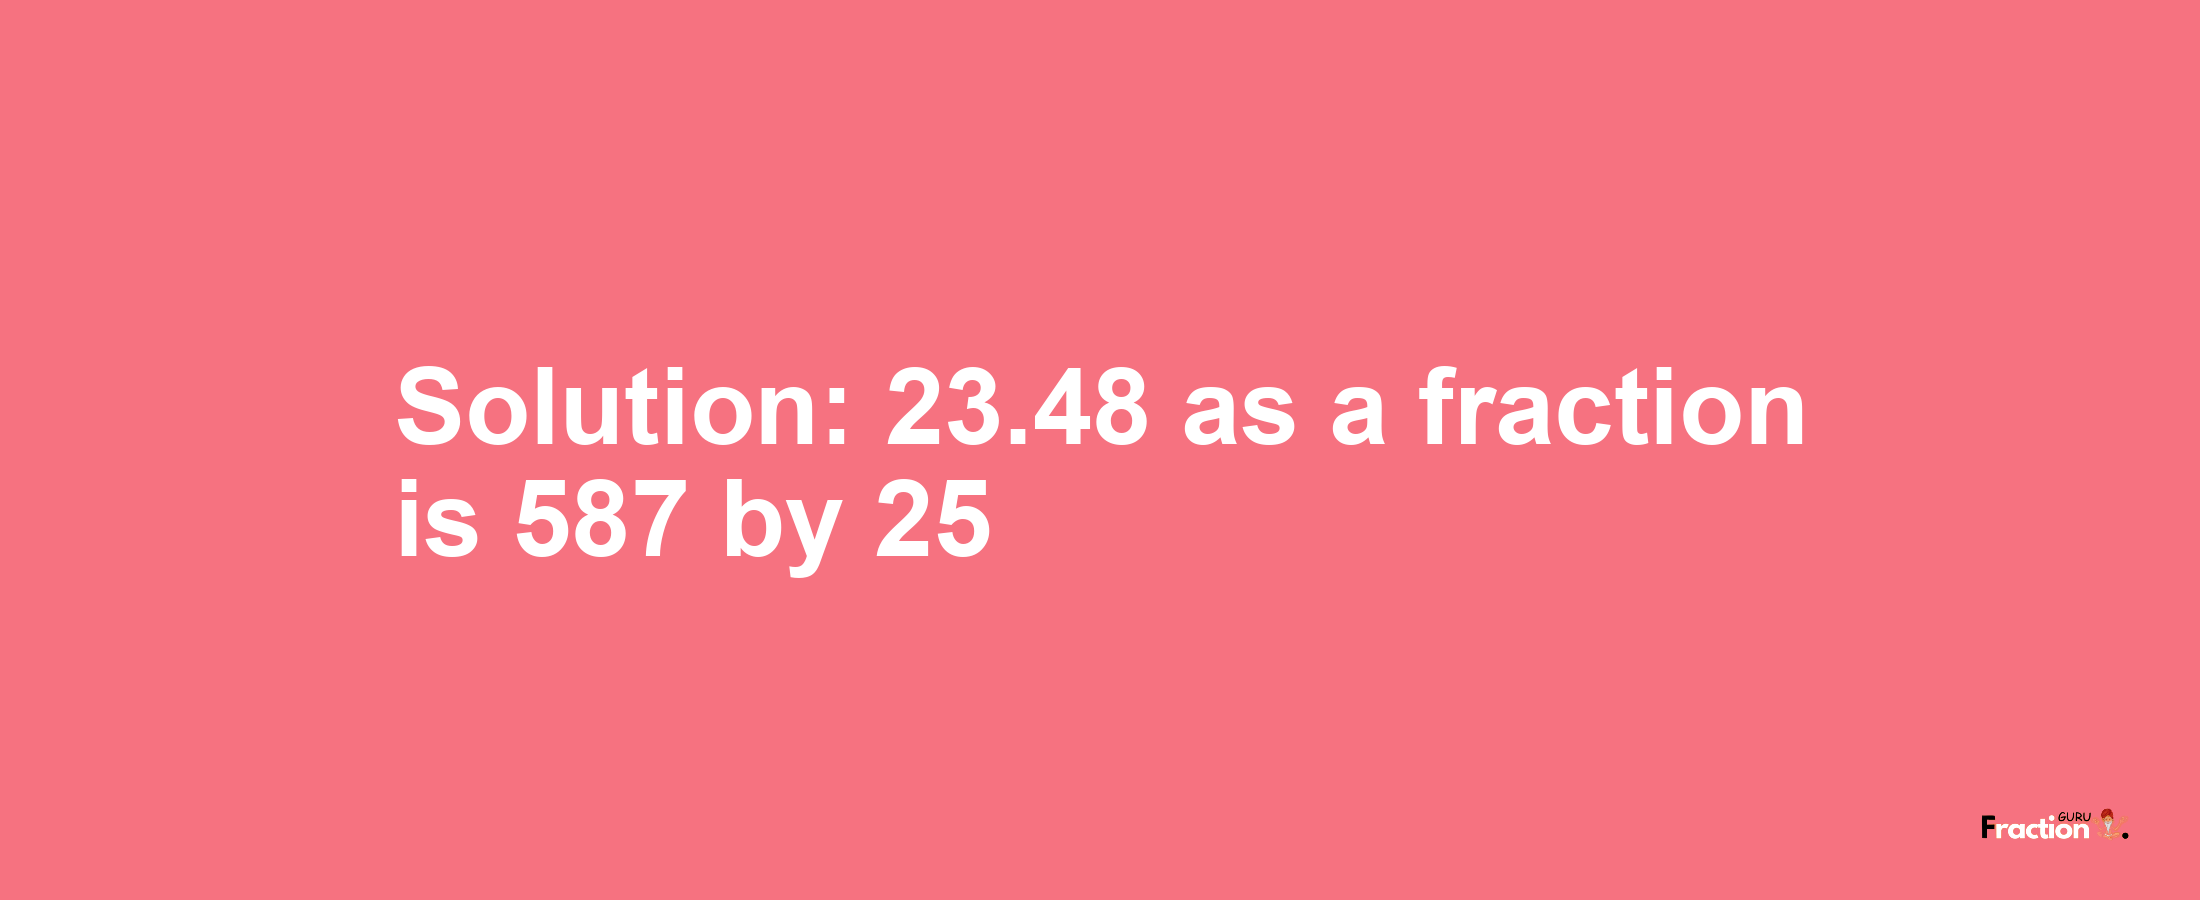 Solution:23.48 as a fraction is 587/25